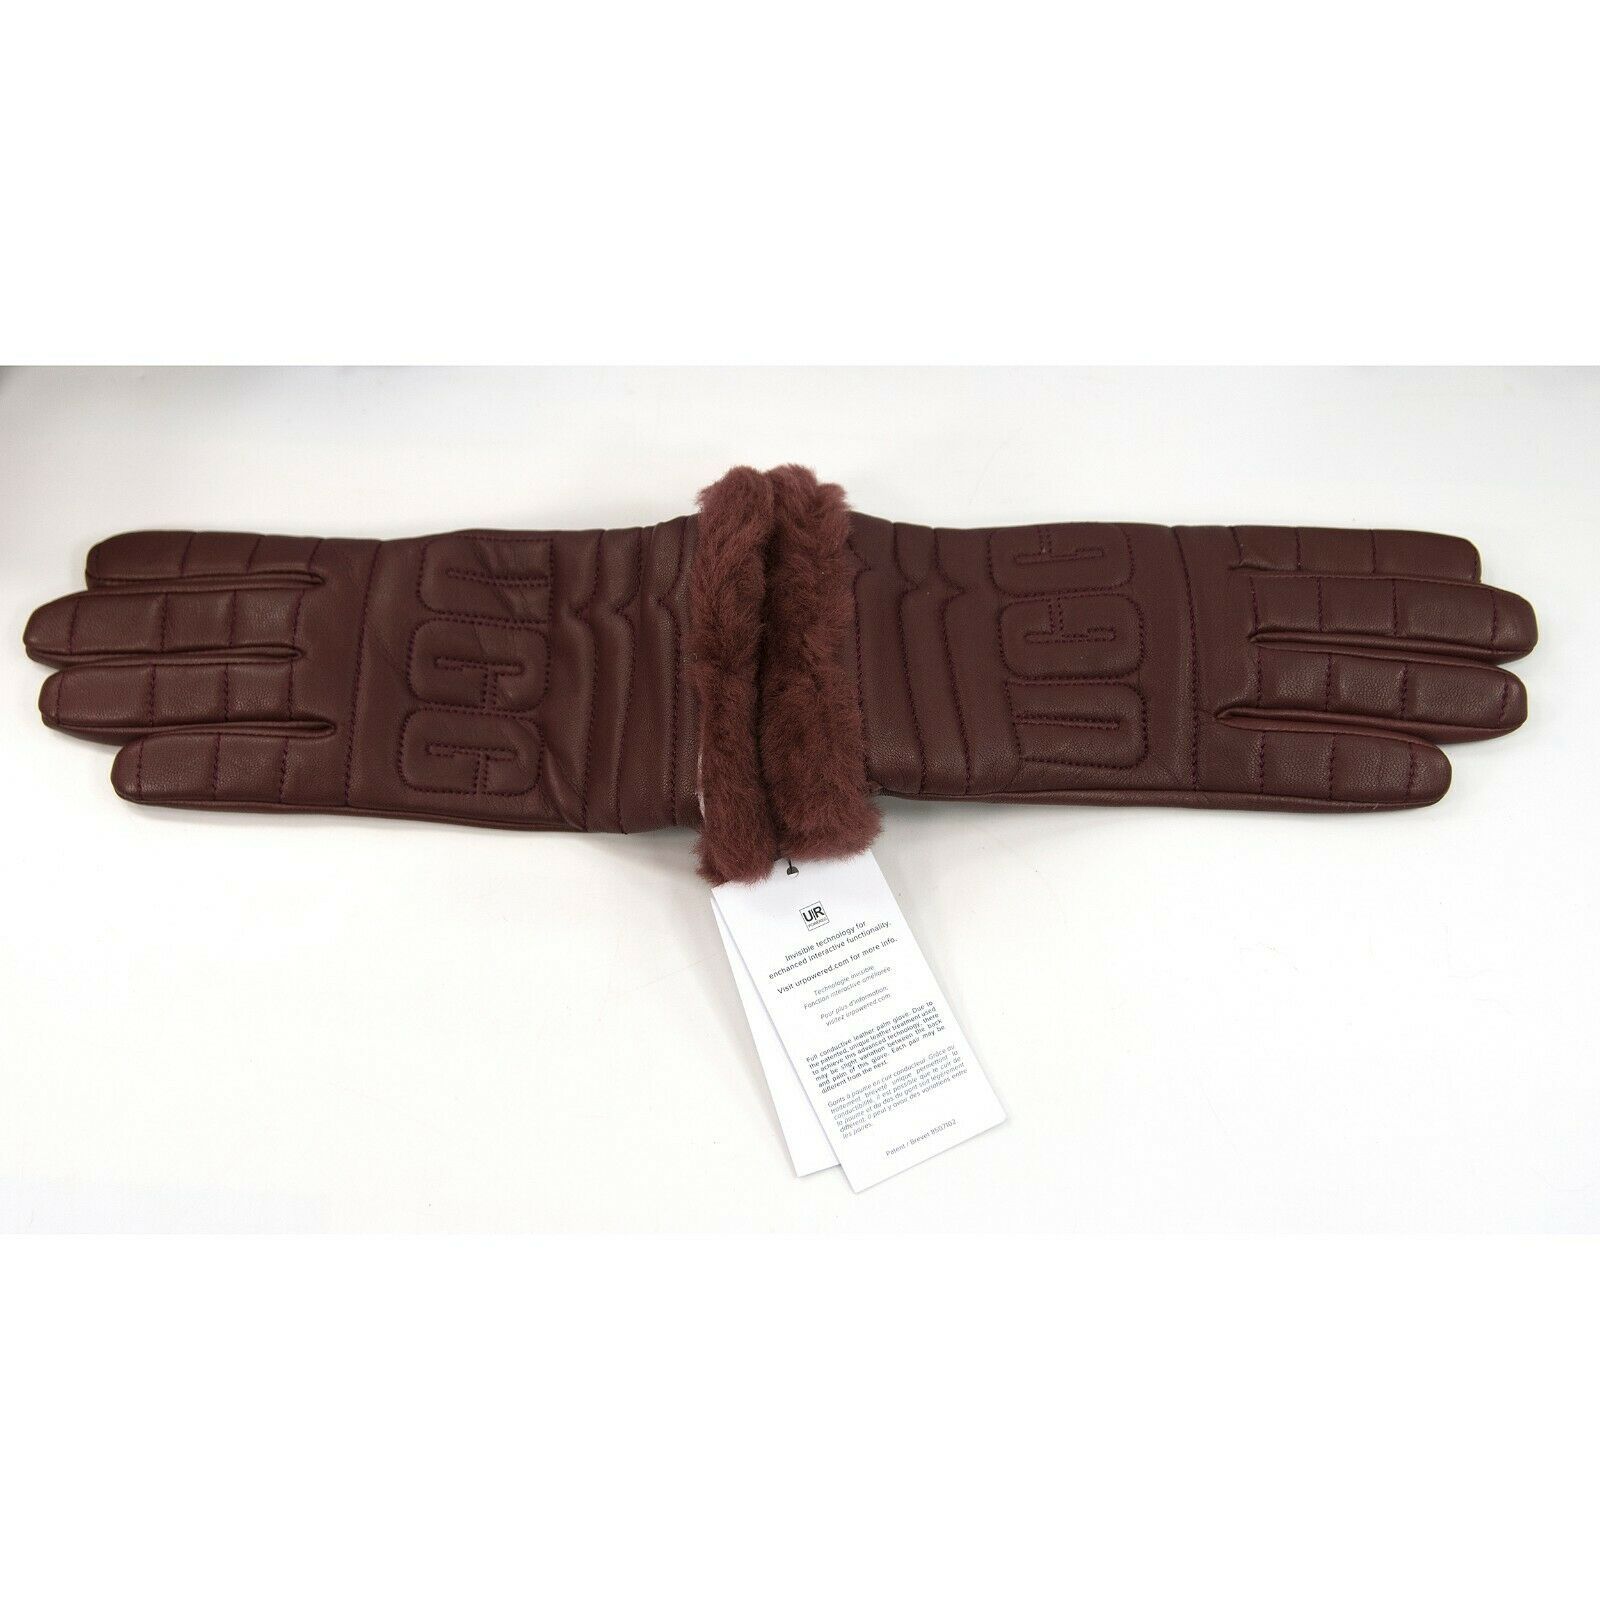 UGG Leather Quilted Logo Gloves with Conductive Tech Palm